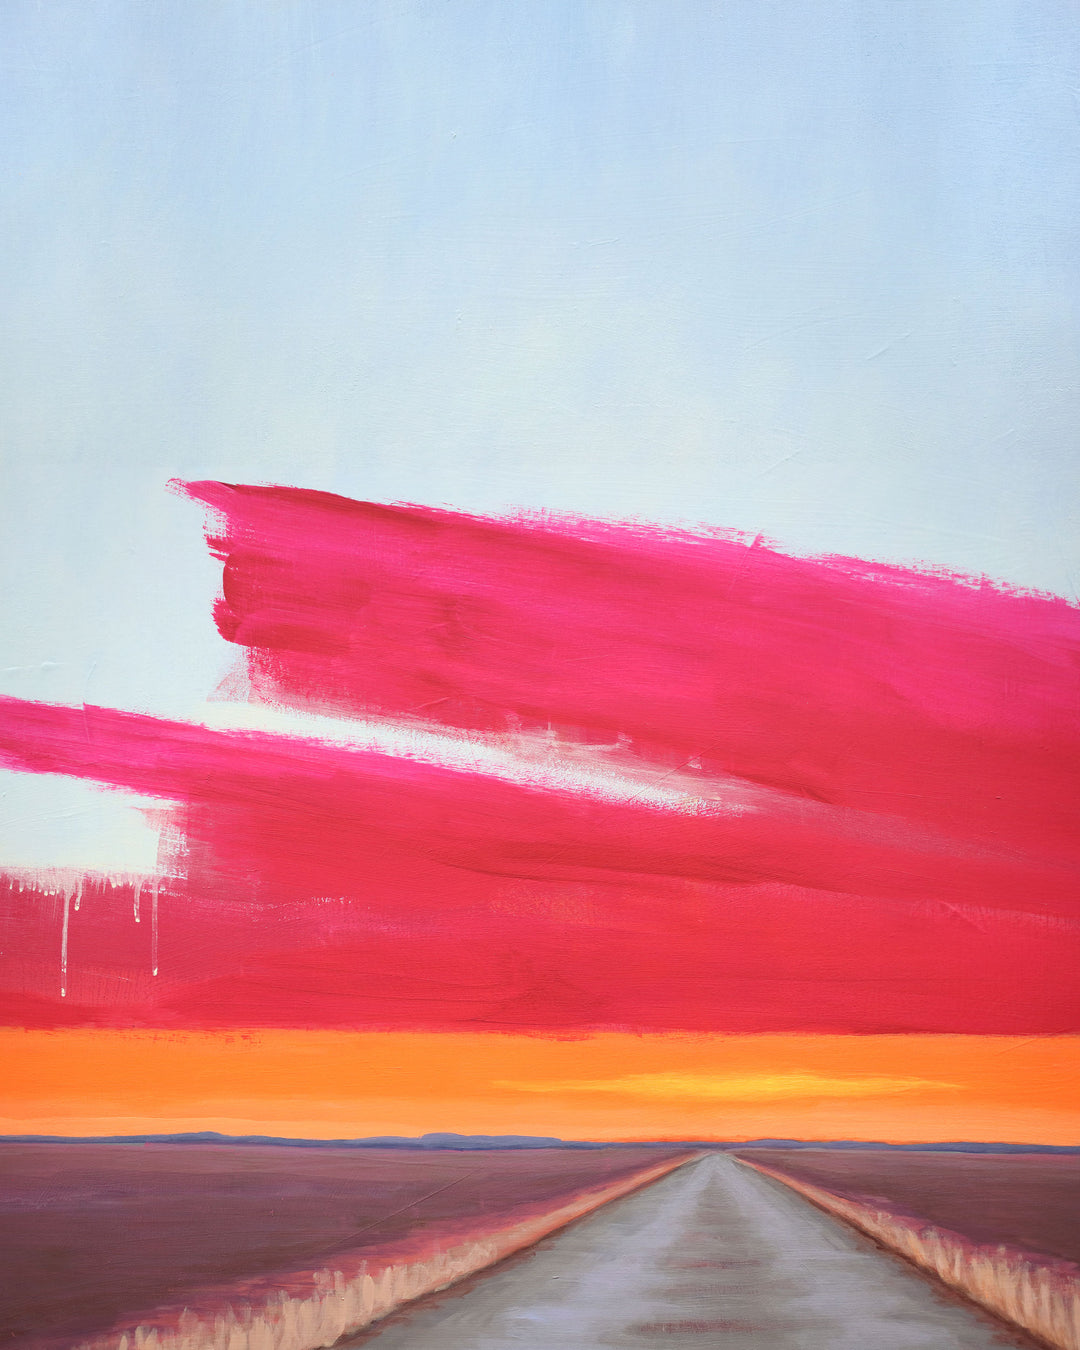 A painting showing a dirt road and a bright orange and pink sunset.